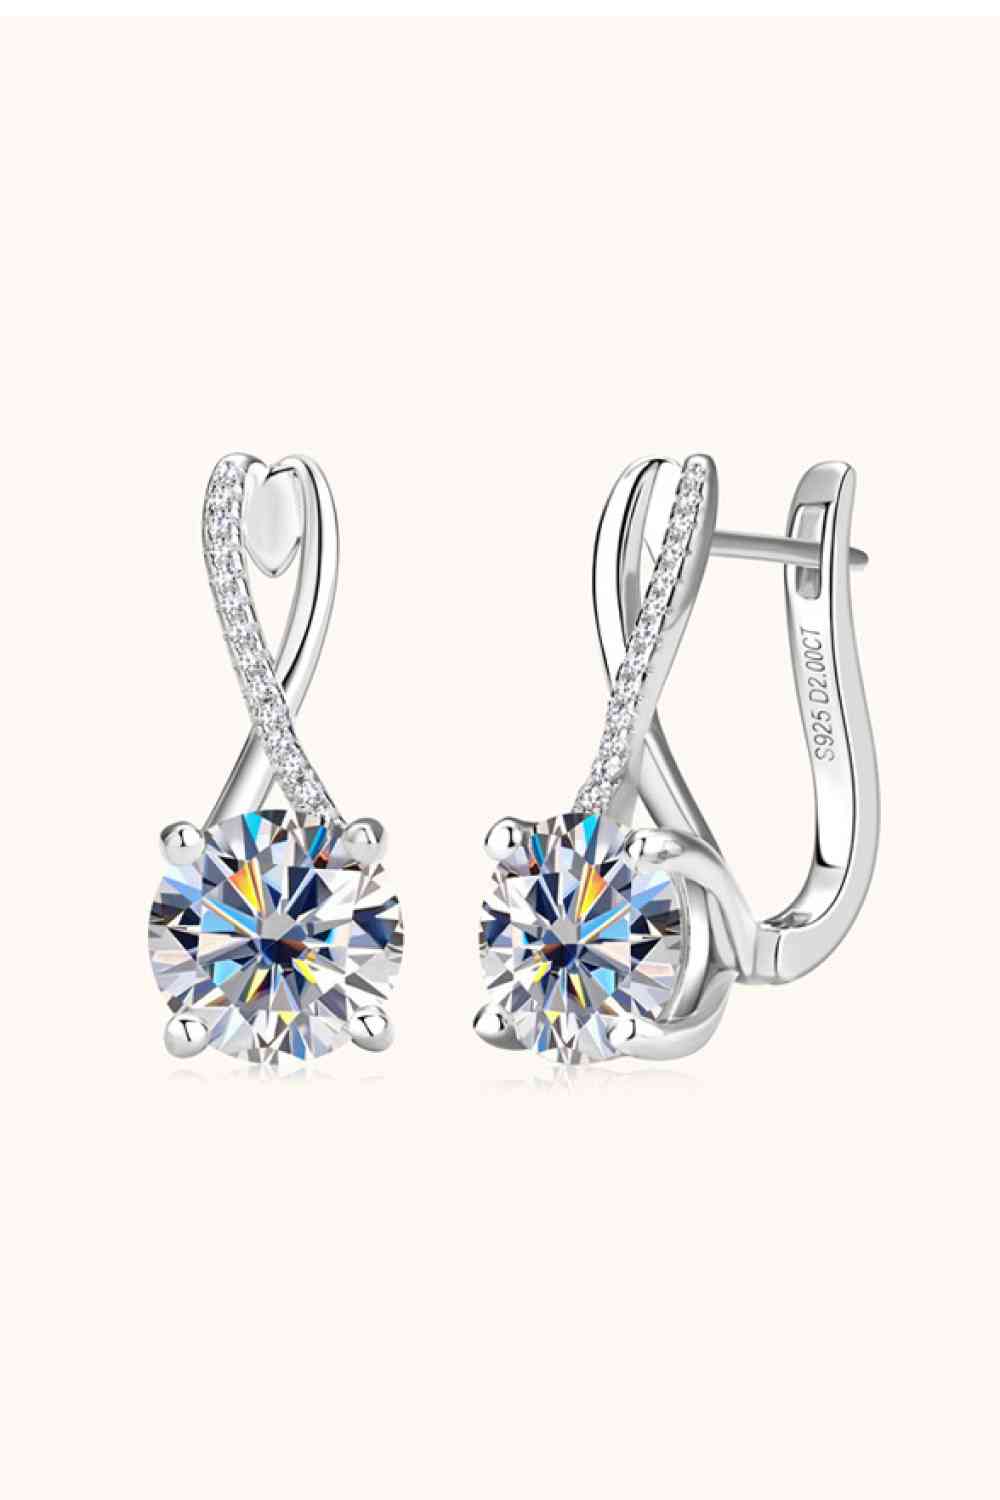 a pair of white gold earrings with a crystal stone